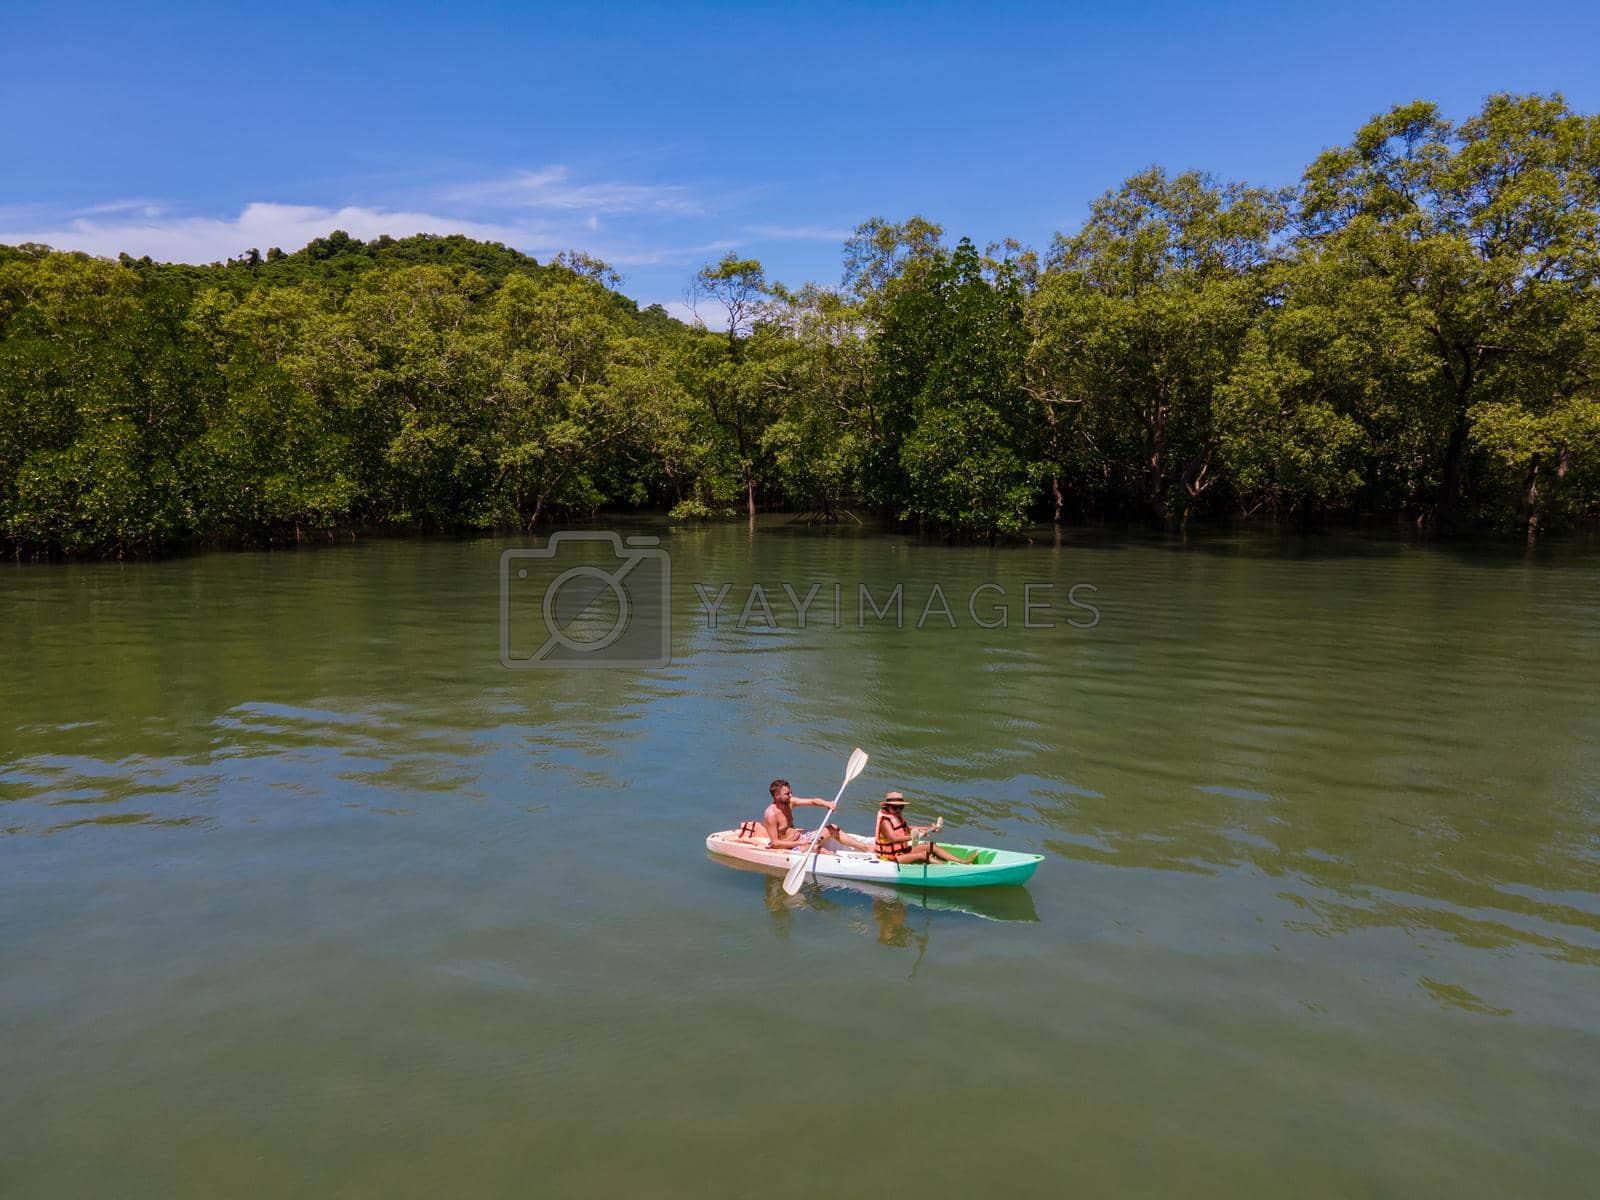 Royalty free image of couple in kayak in the ocean of Phuket Naka Island Thailand, men and woman in kayak at a tropical island with palm trees and mangrove forrest by fokkebok